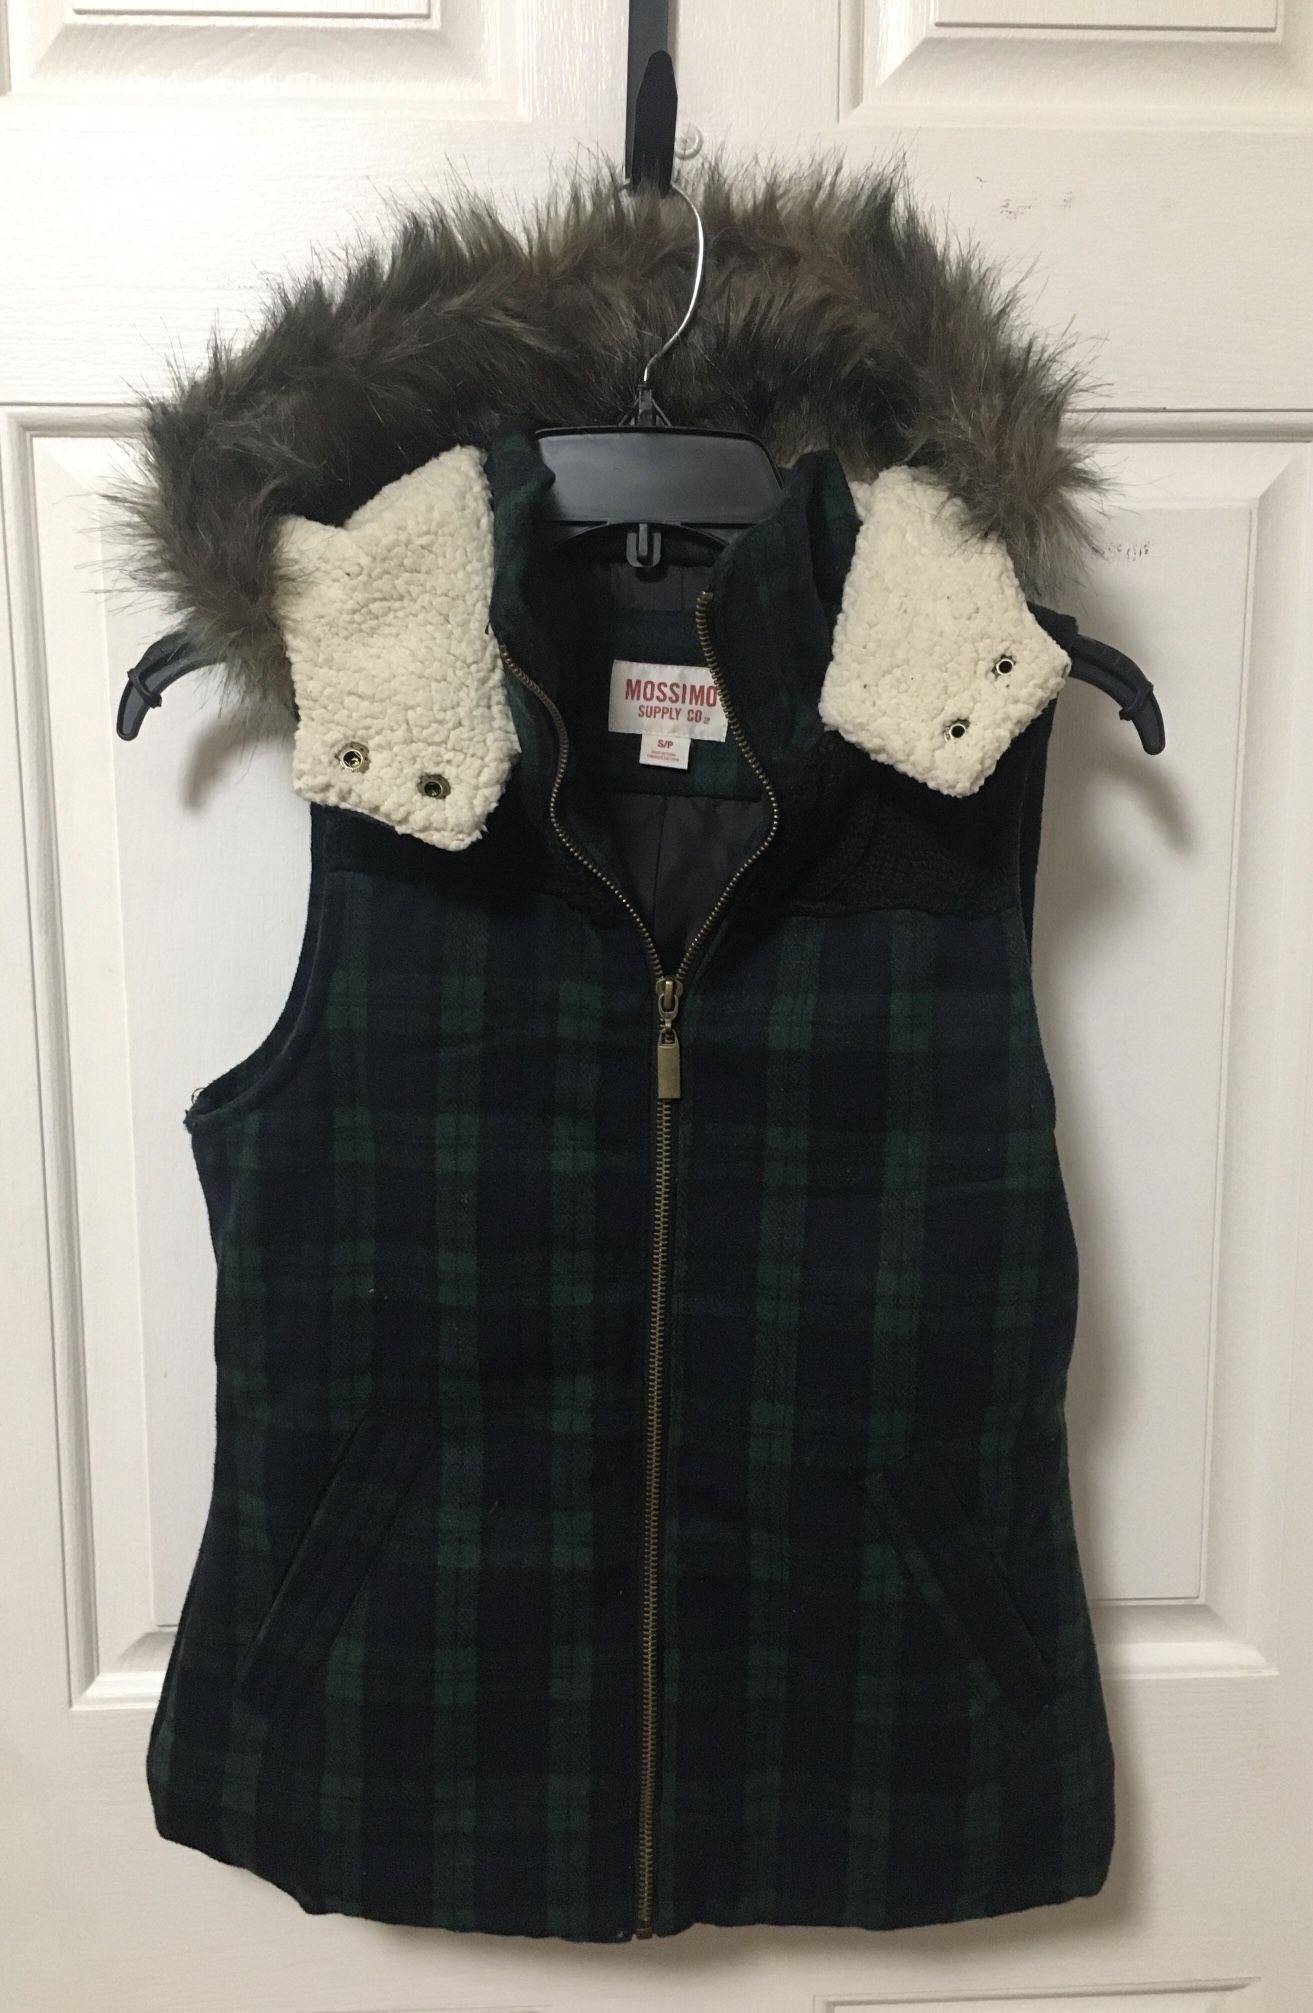 Blue/Green Plaid Sherpa Vest with Faux Fur Hood S/P